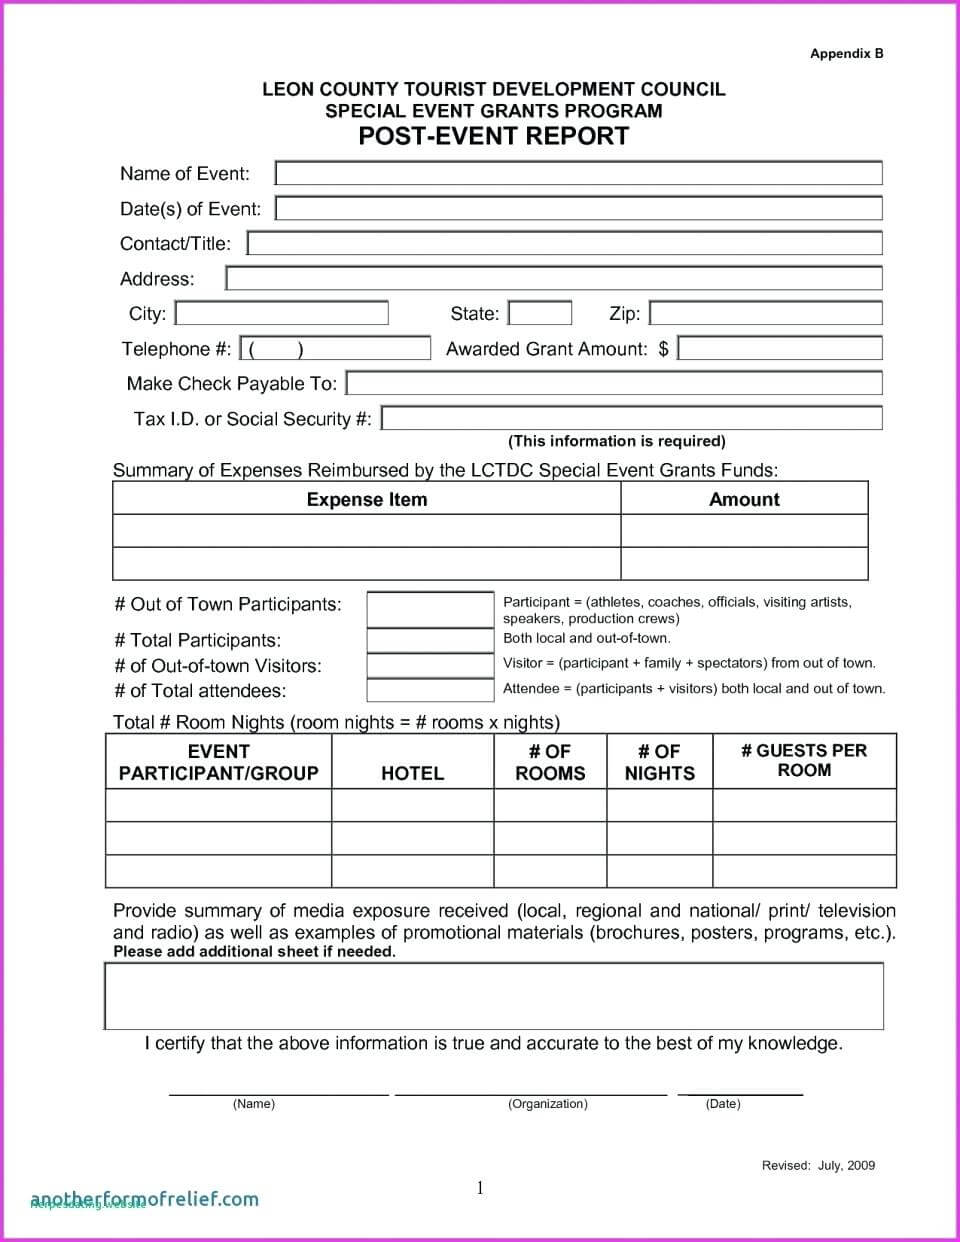 Report Examples Autopsy Template Grant E2 80 93 Wovensheet Intended For Blank Autopsy Report Template